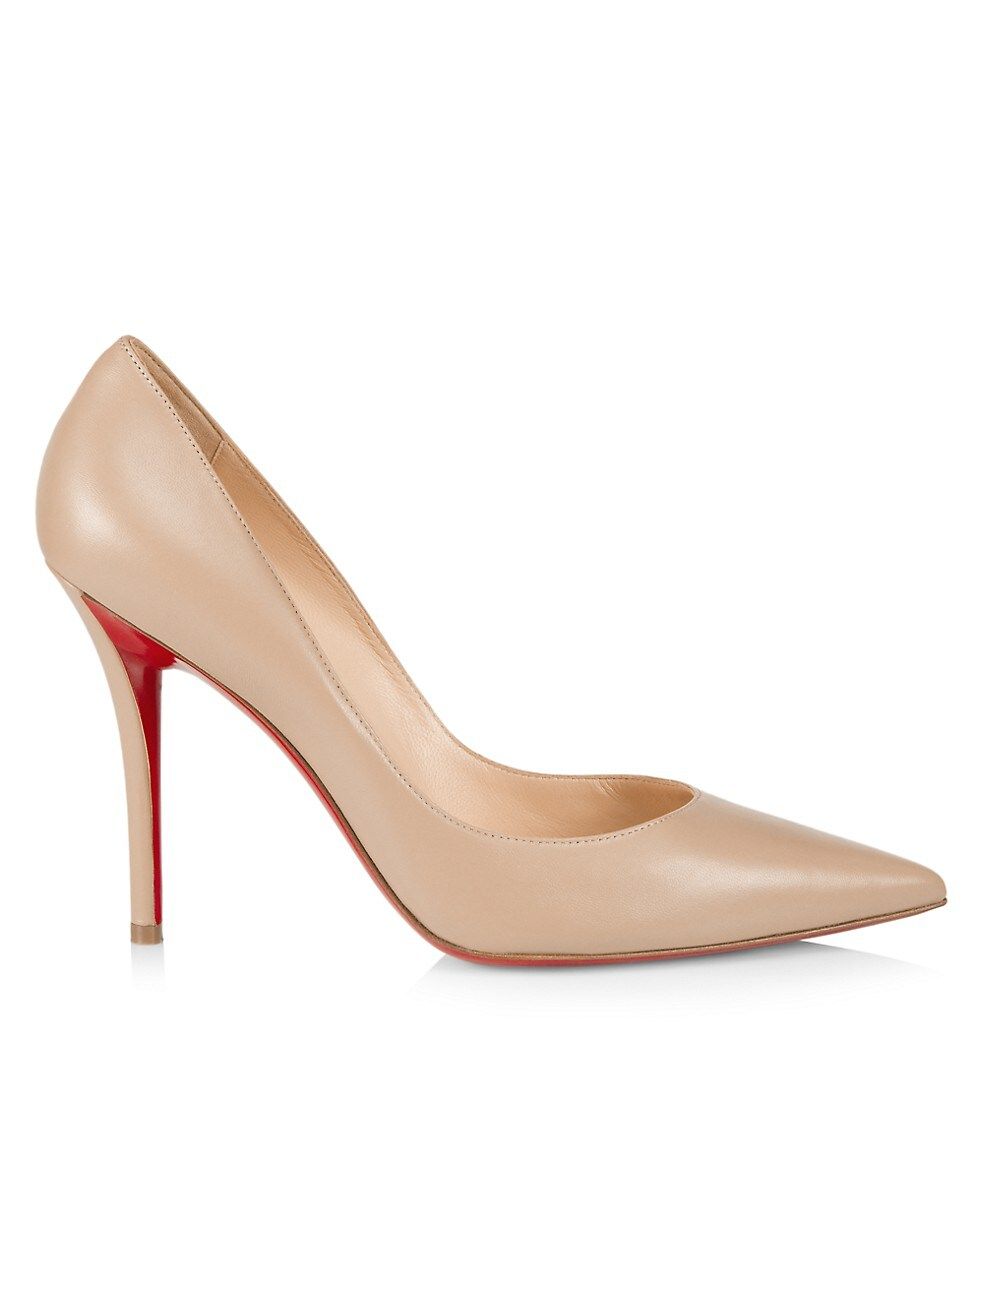 Christian Louboutin Apostrophy 100 Leather Pumps | Saks Fifth Avenue